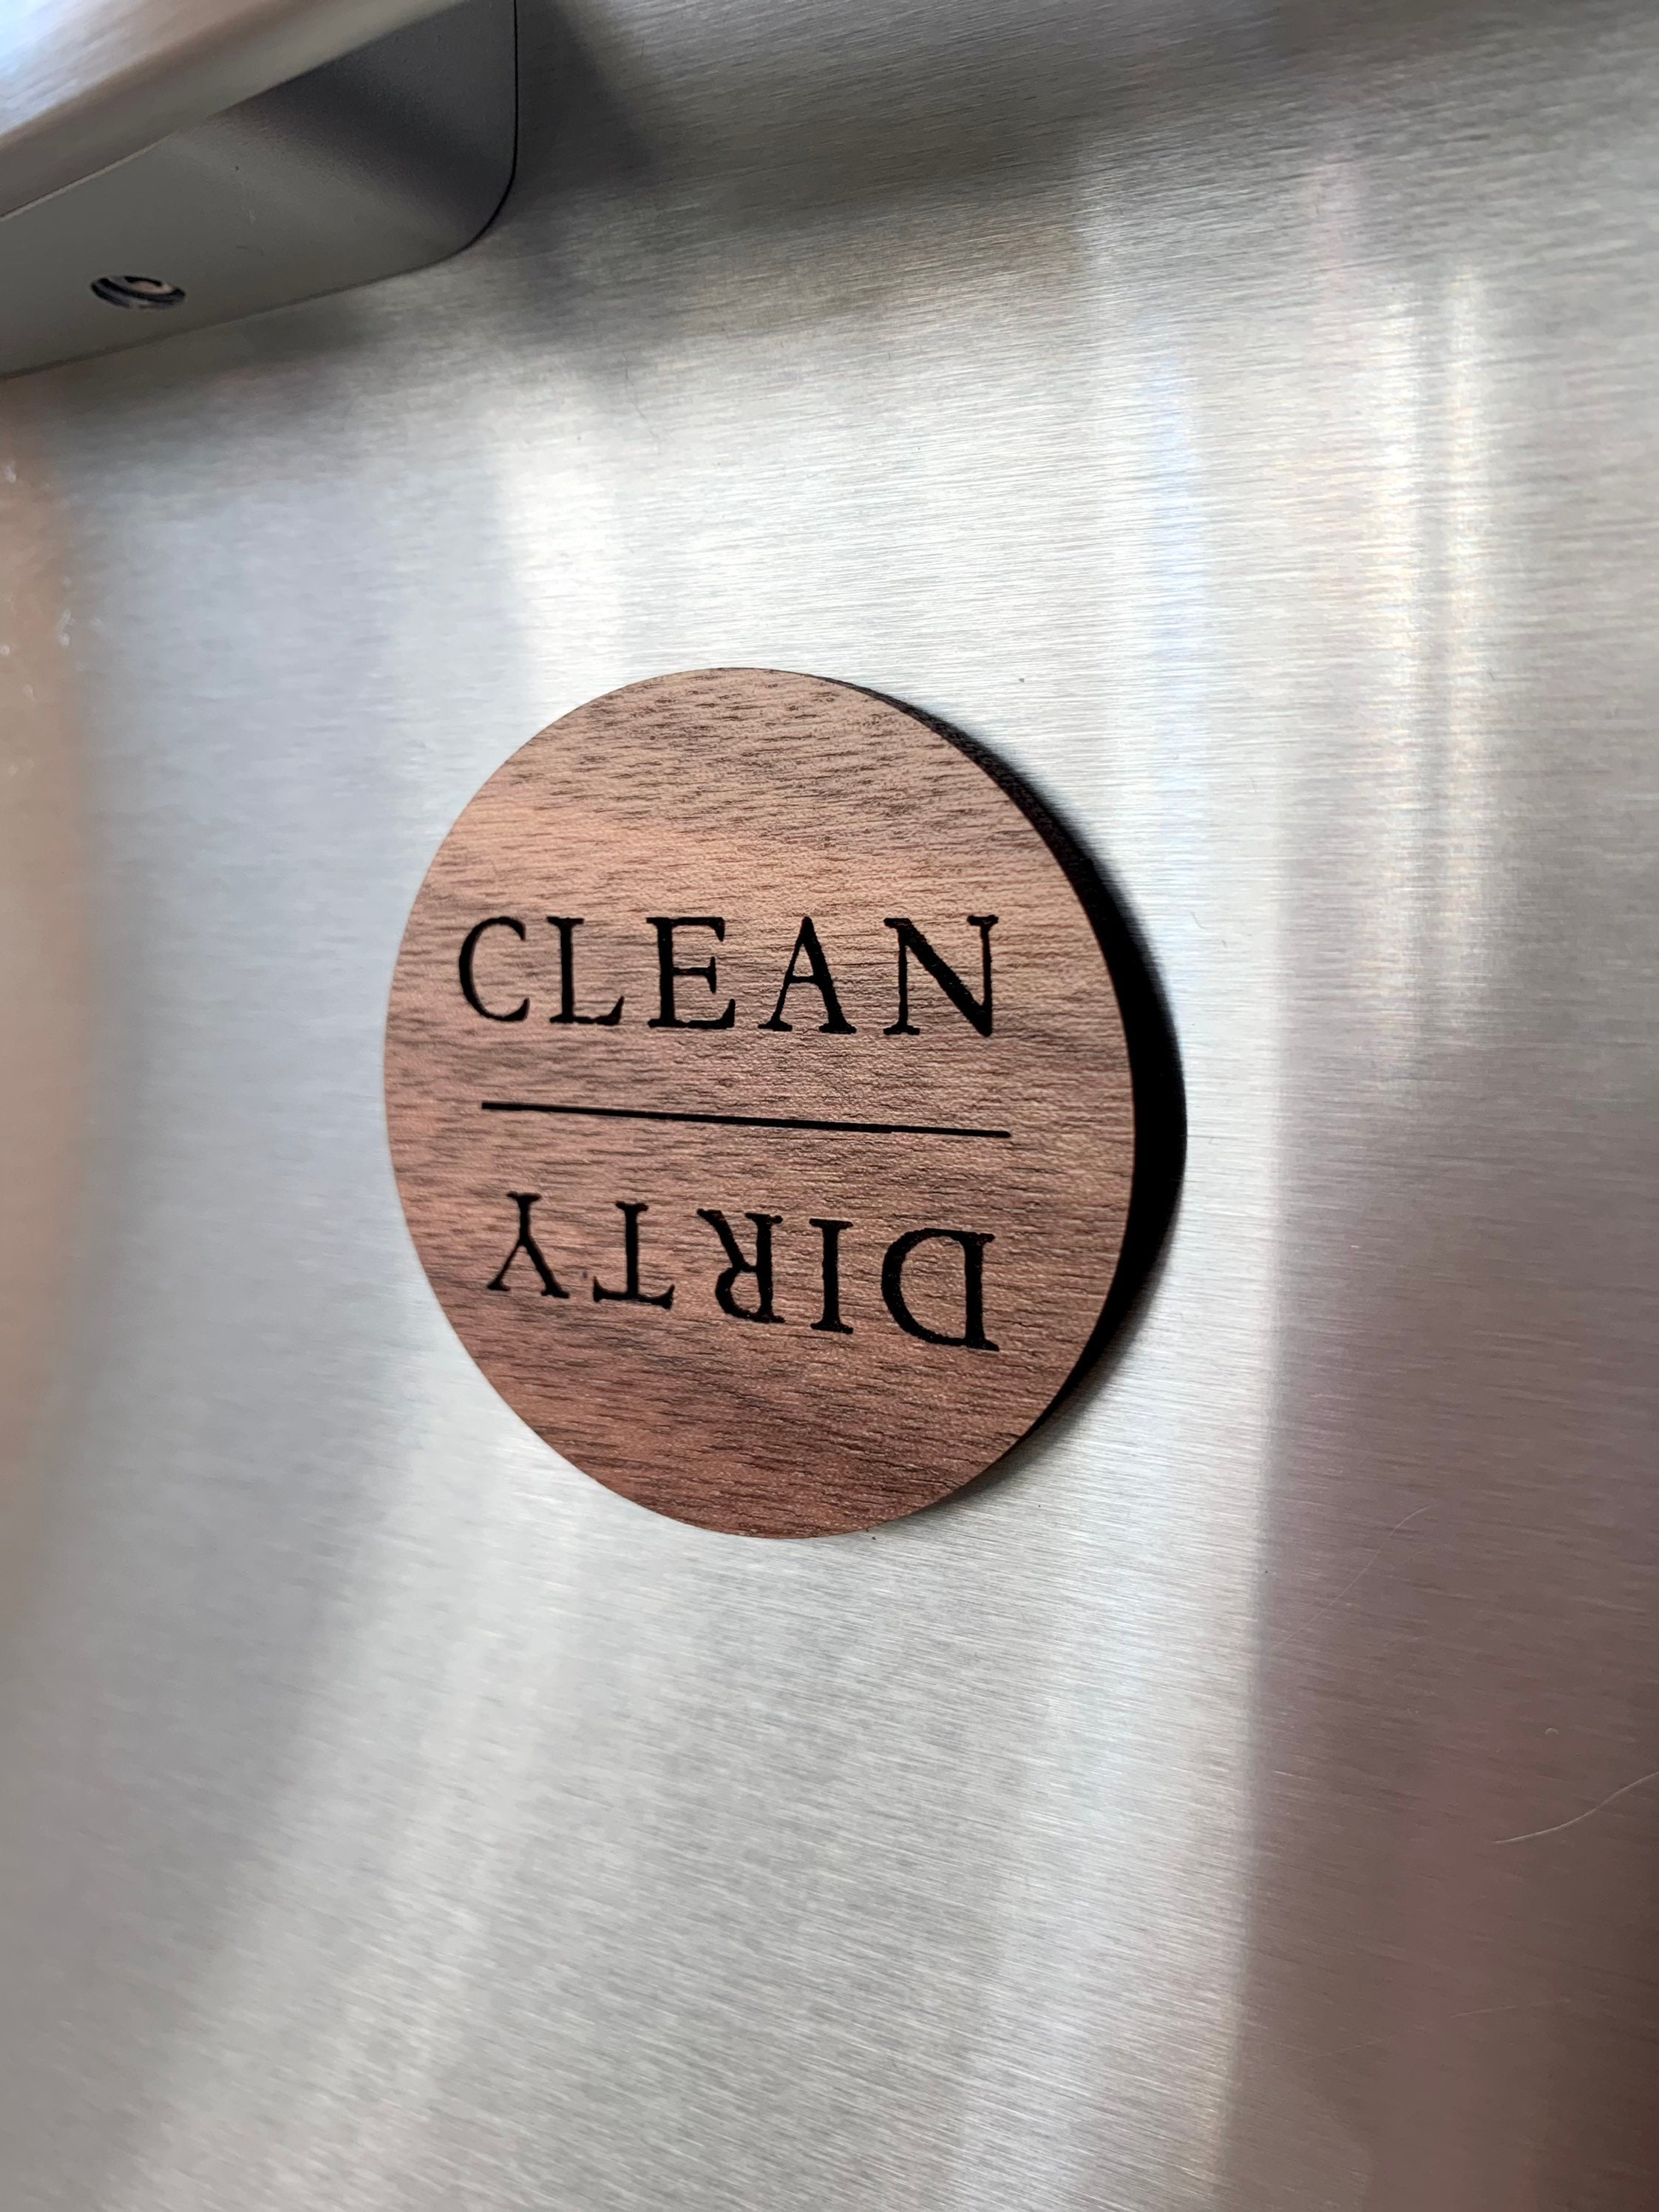 TEYGA Bamboo Dishwasher Clean Dirty Magnet Sign, With Stainless Steel  Window Dishwasher Magnet Clean Dirty 